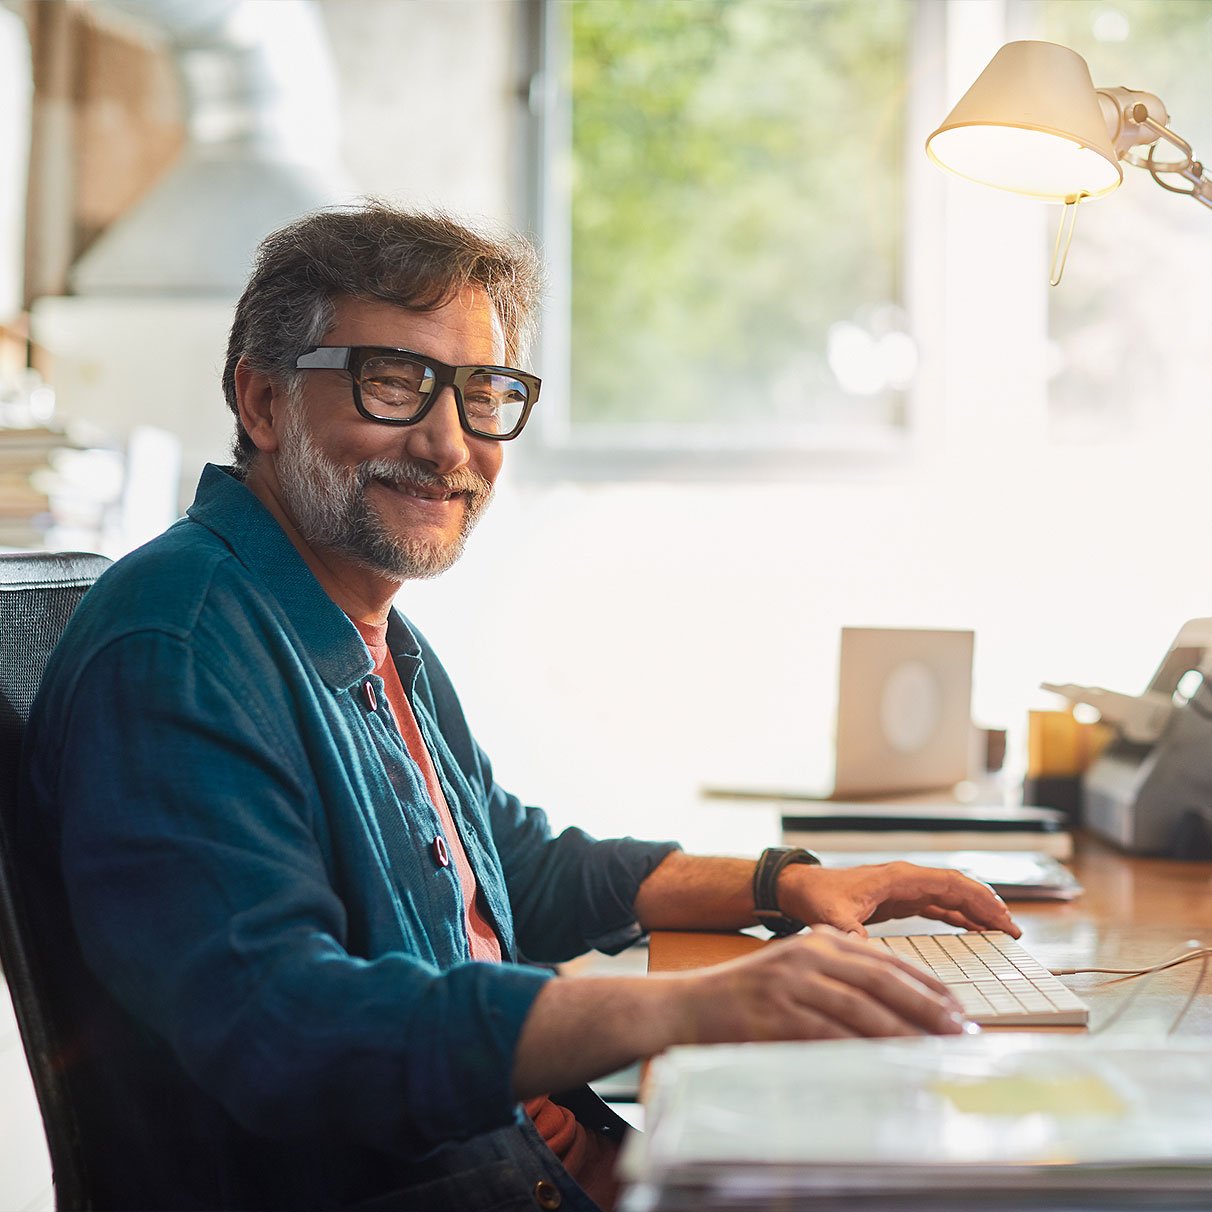 Elderly-man-with-glasses-smiling-and-using-PC